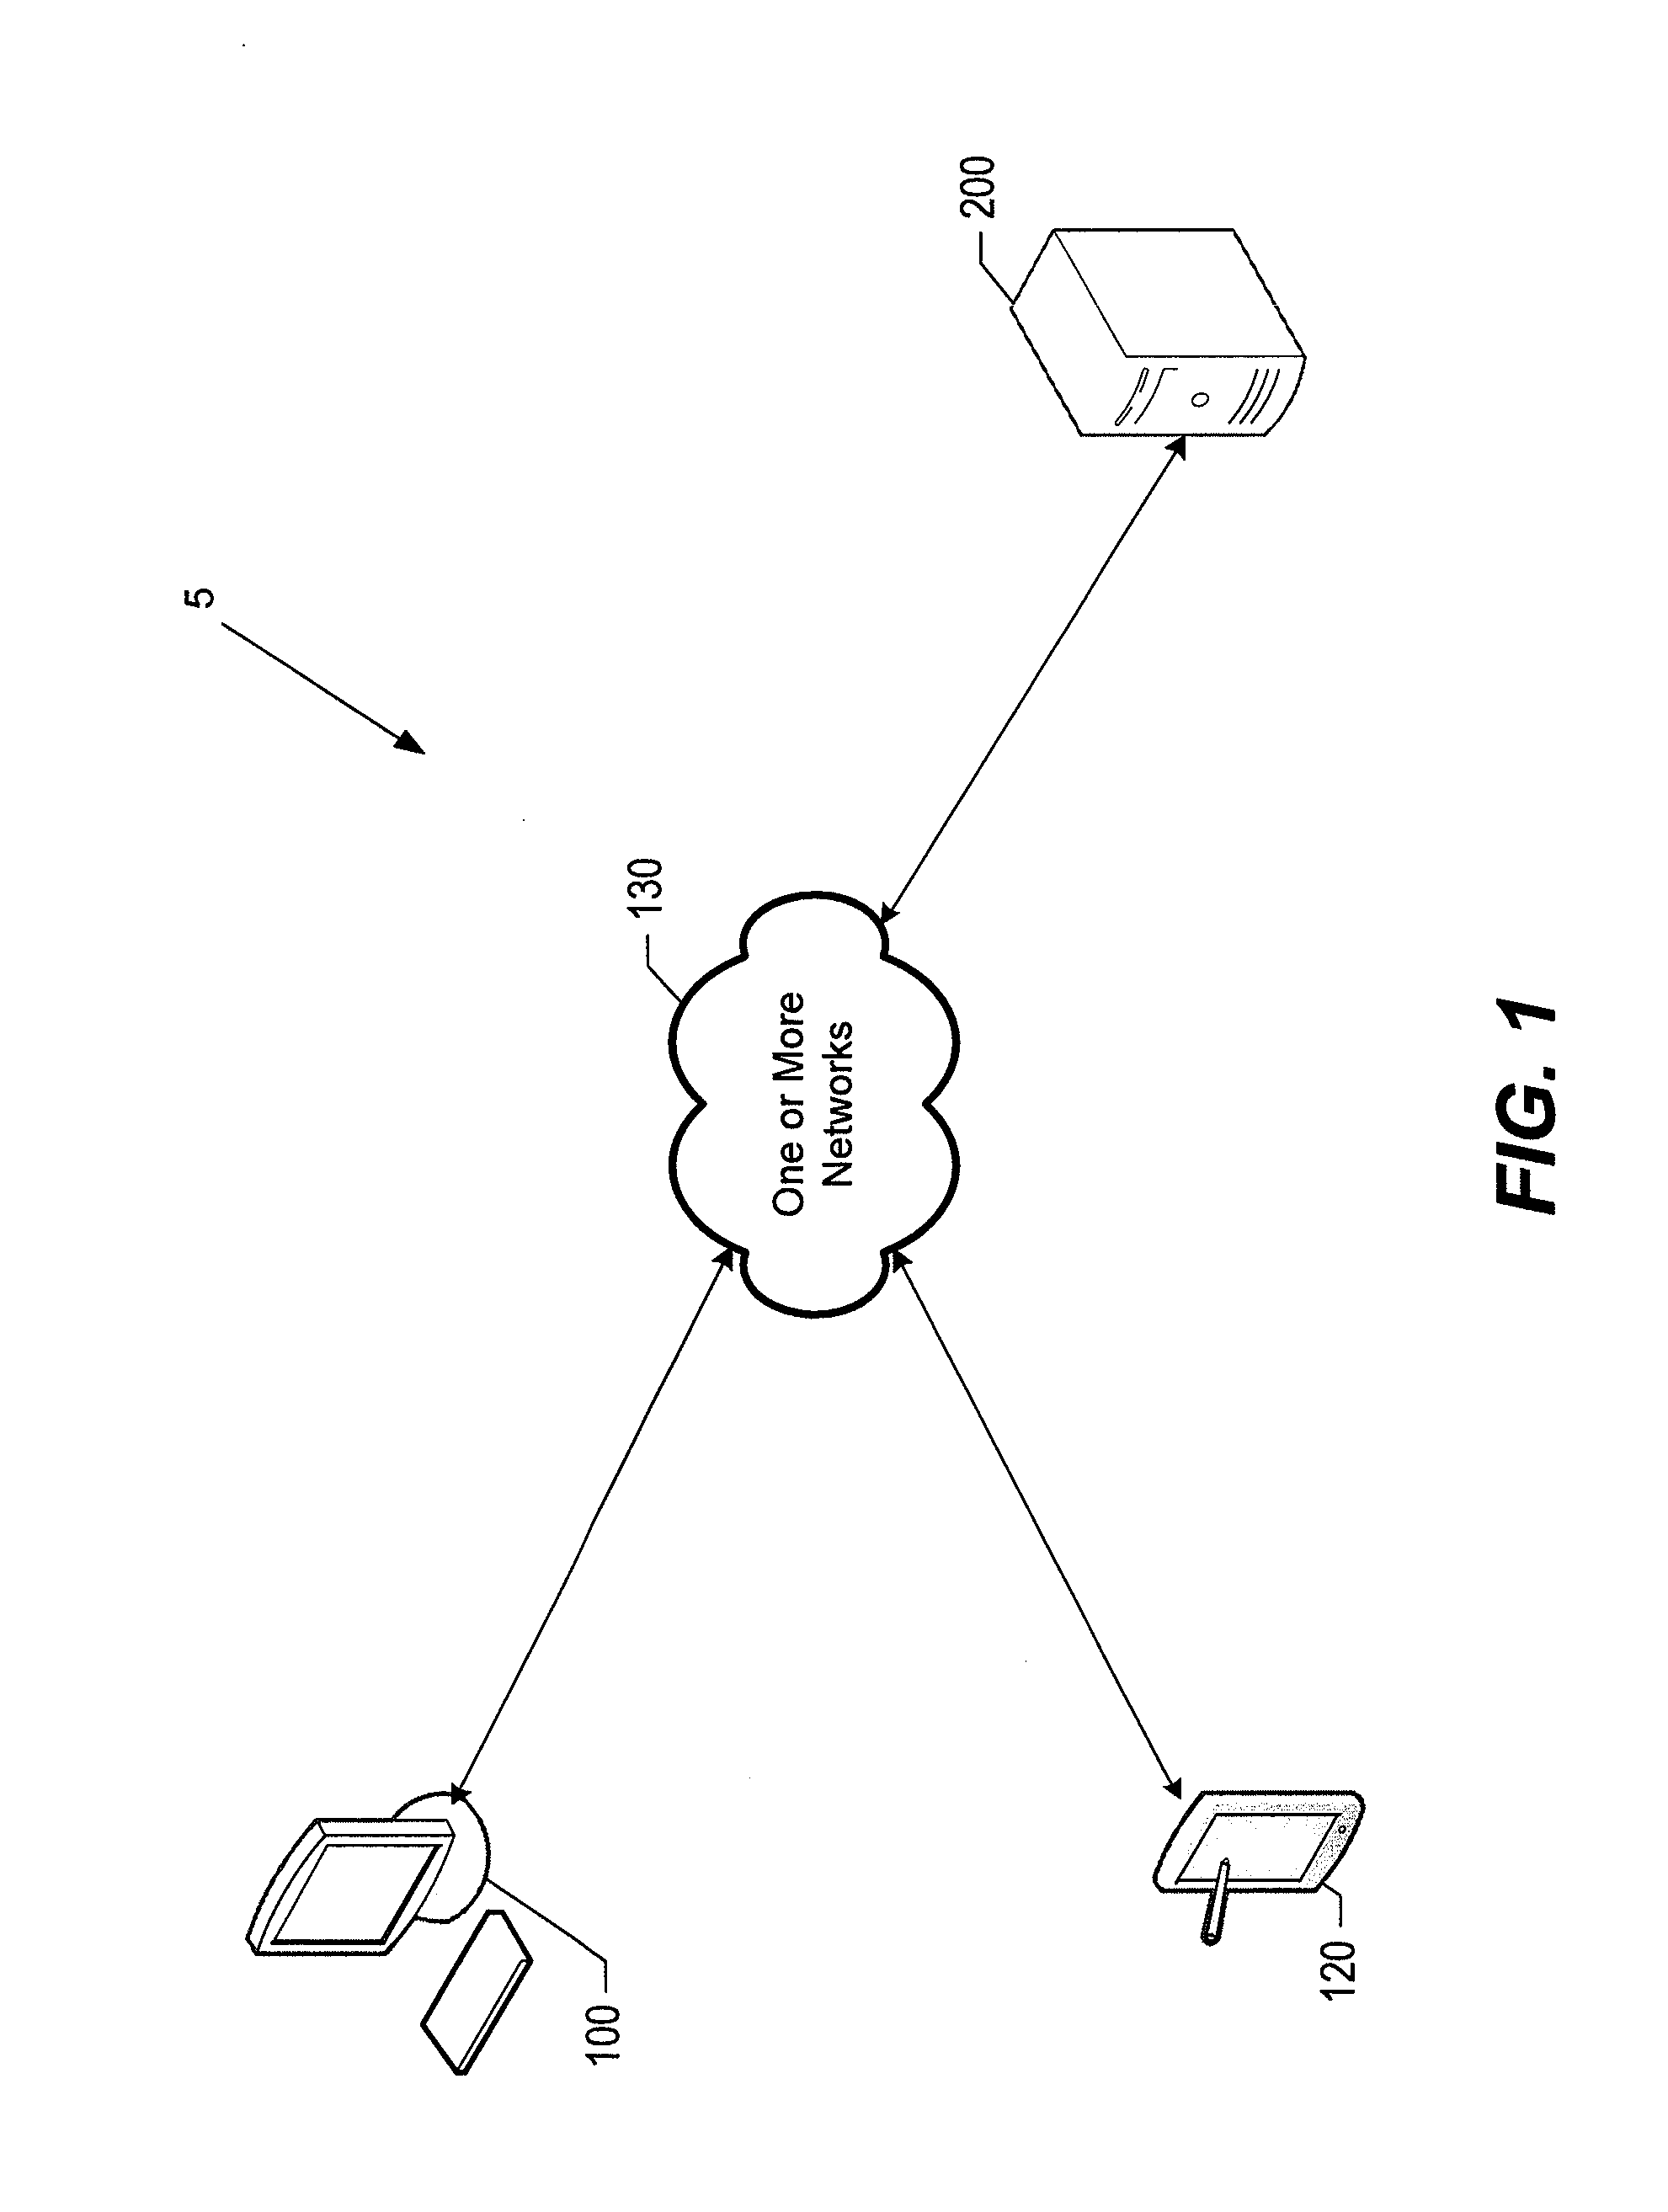 Systems and methods for facilitating consolidated management and distribution of veterinary care data